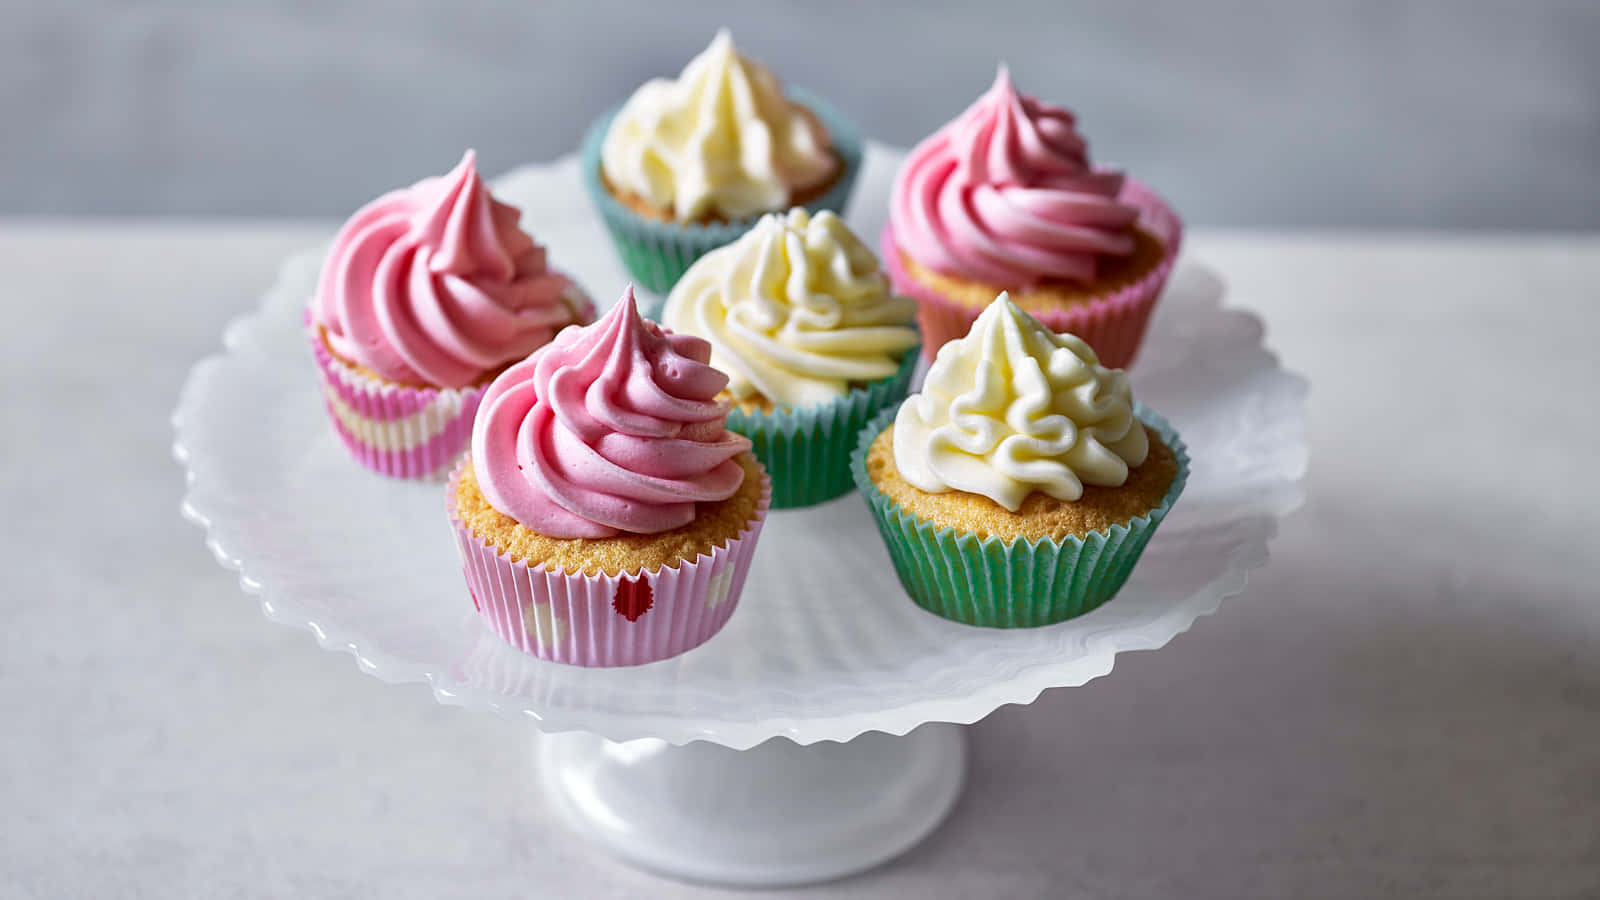 A colorful and delicious cupcake dessert for any occasion